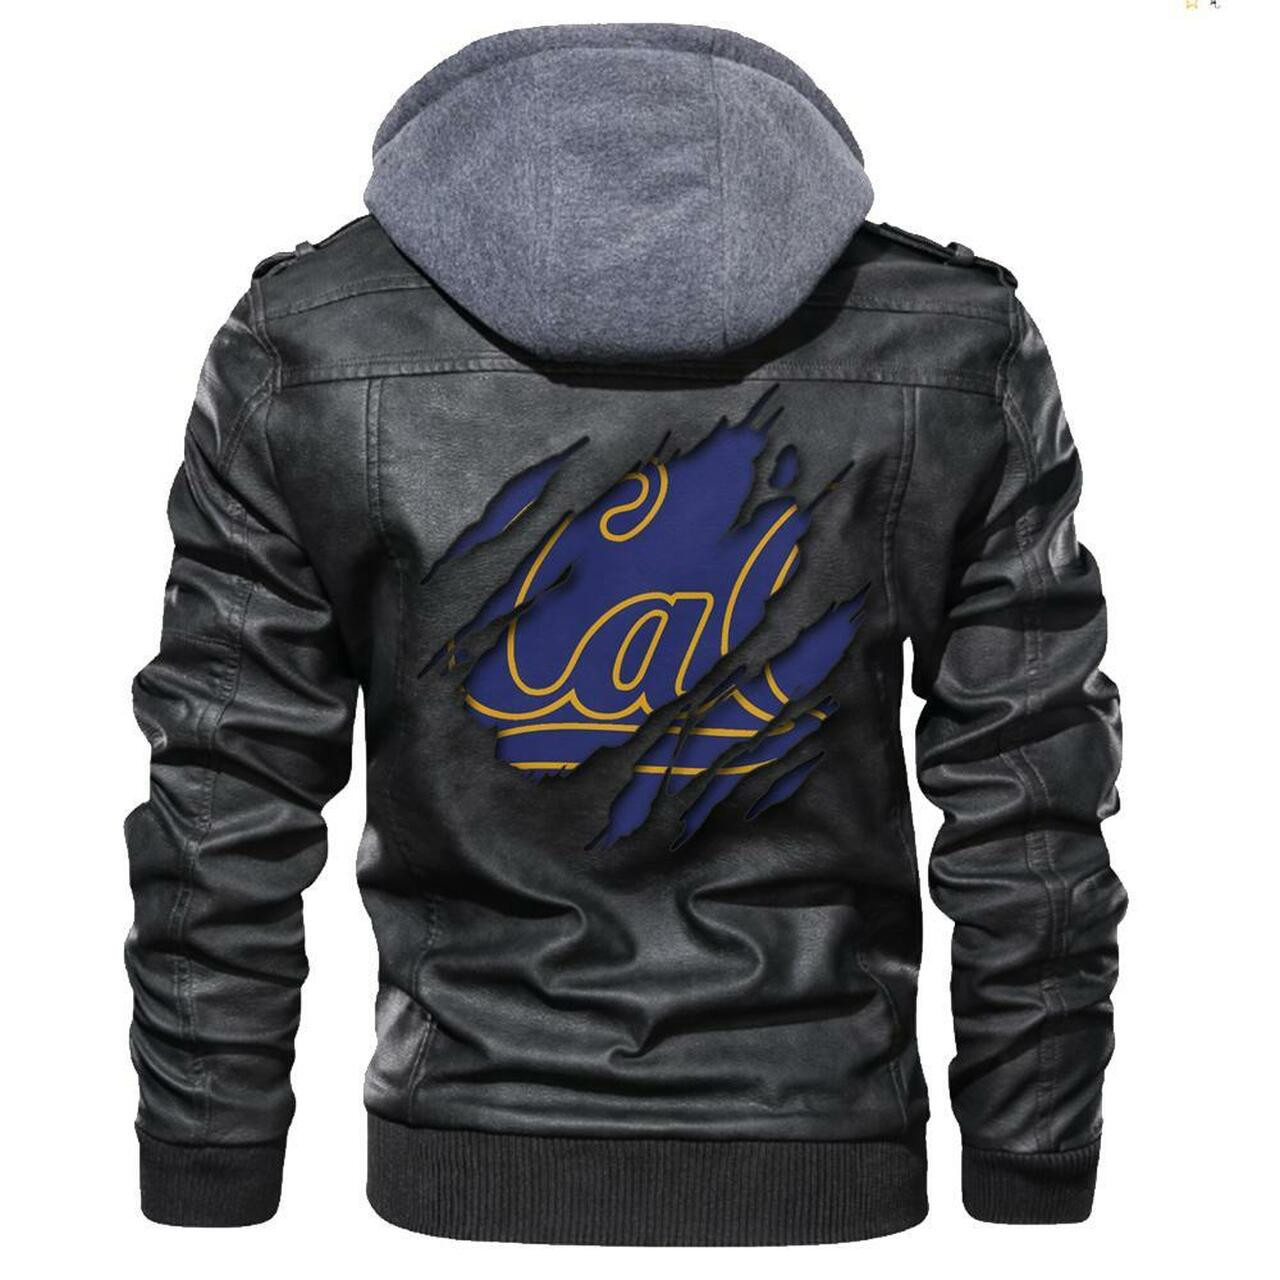 Don't wait another minute, Get Hot Leather Jacket today 116